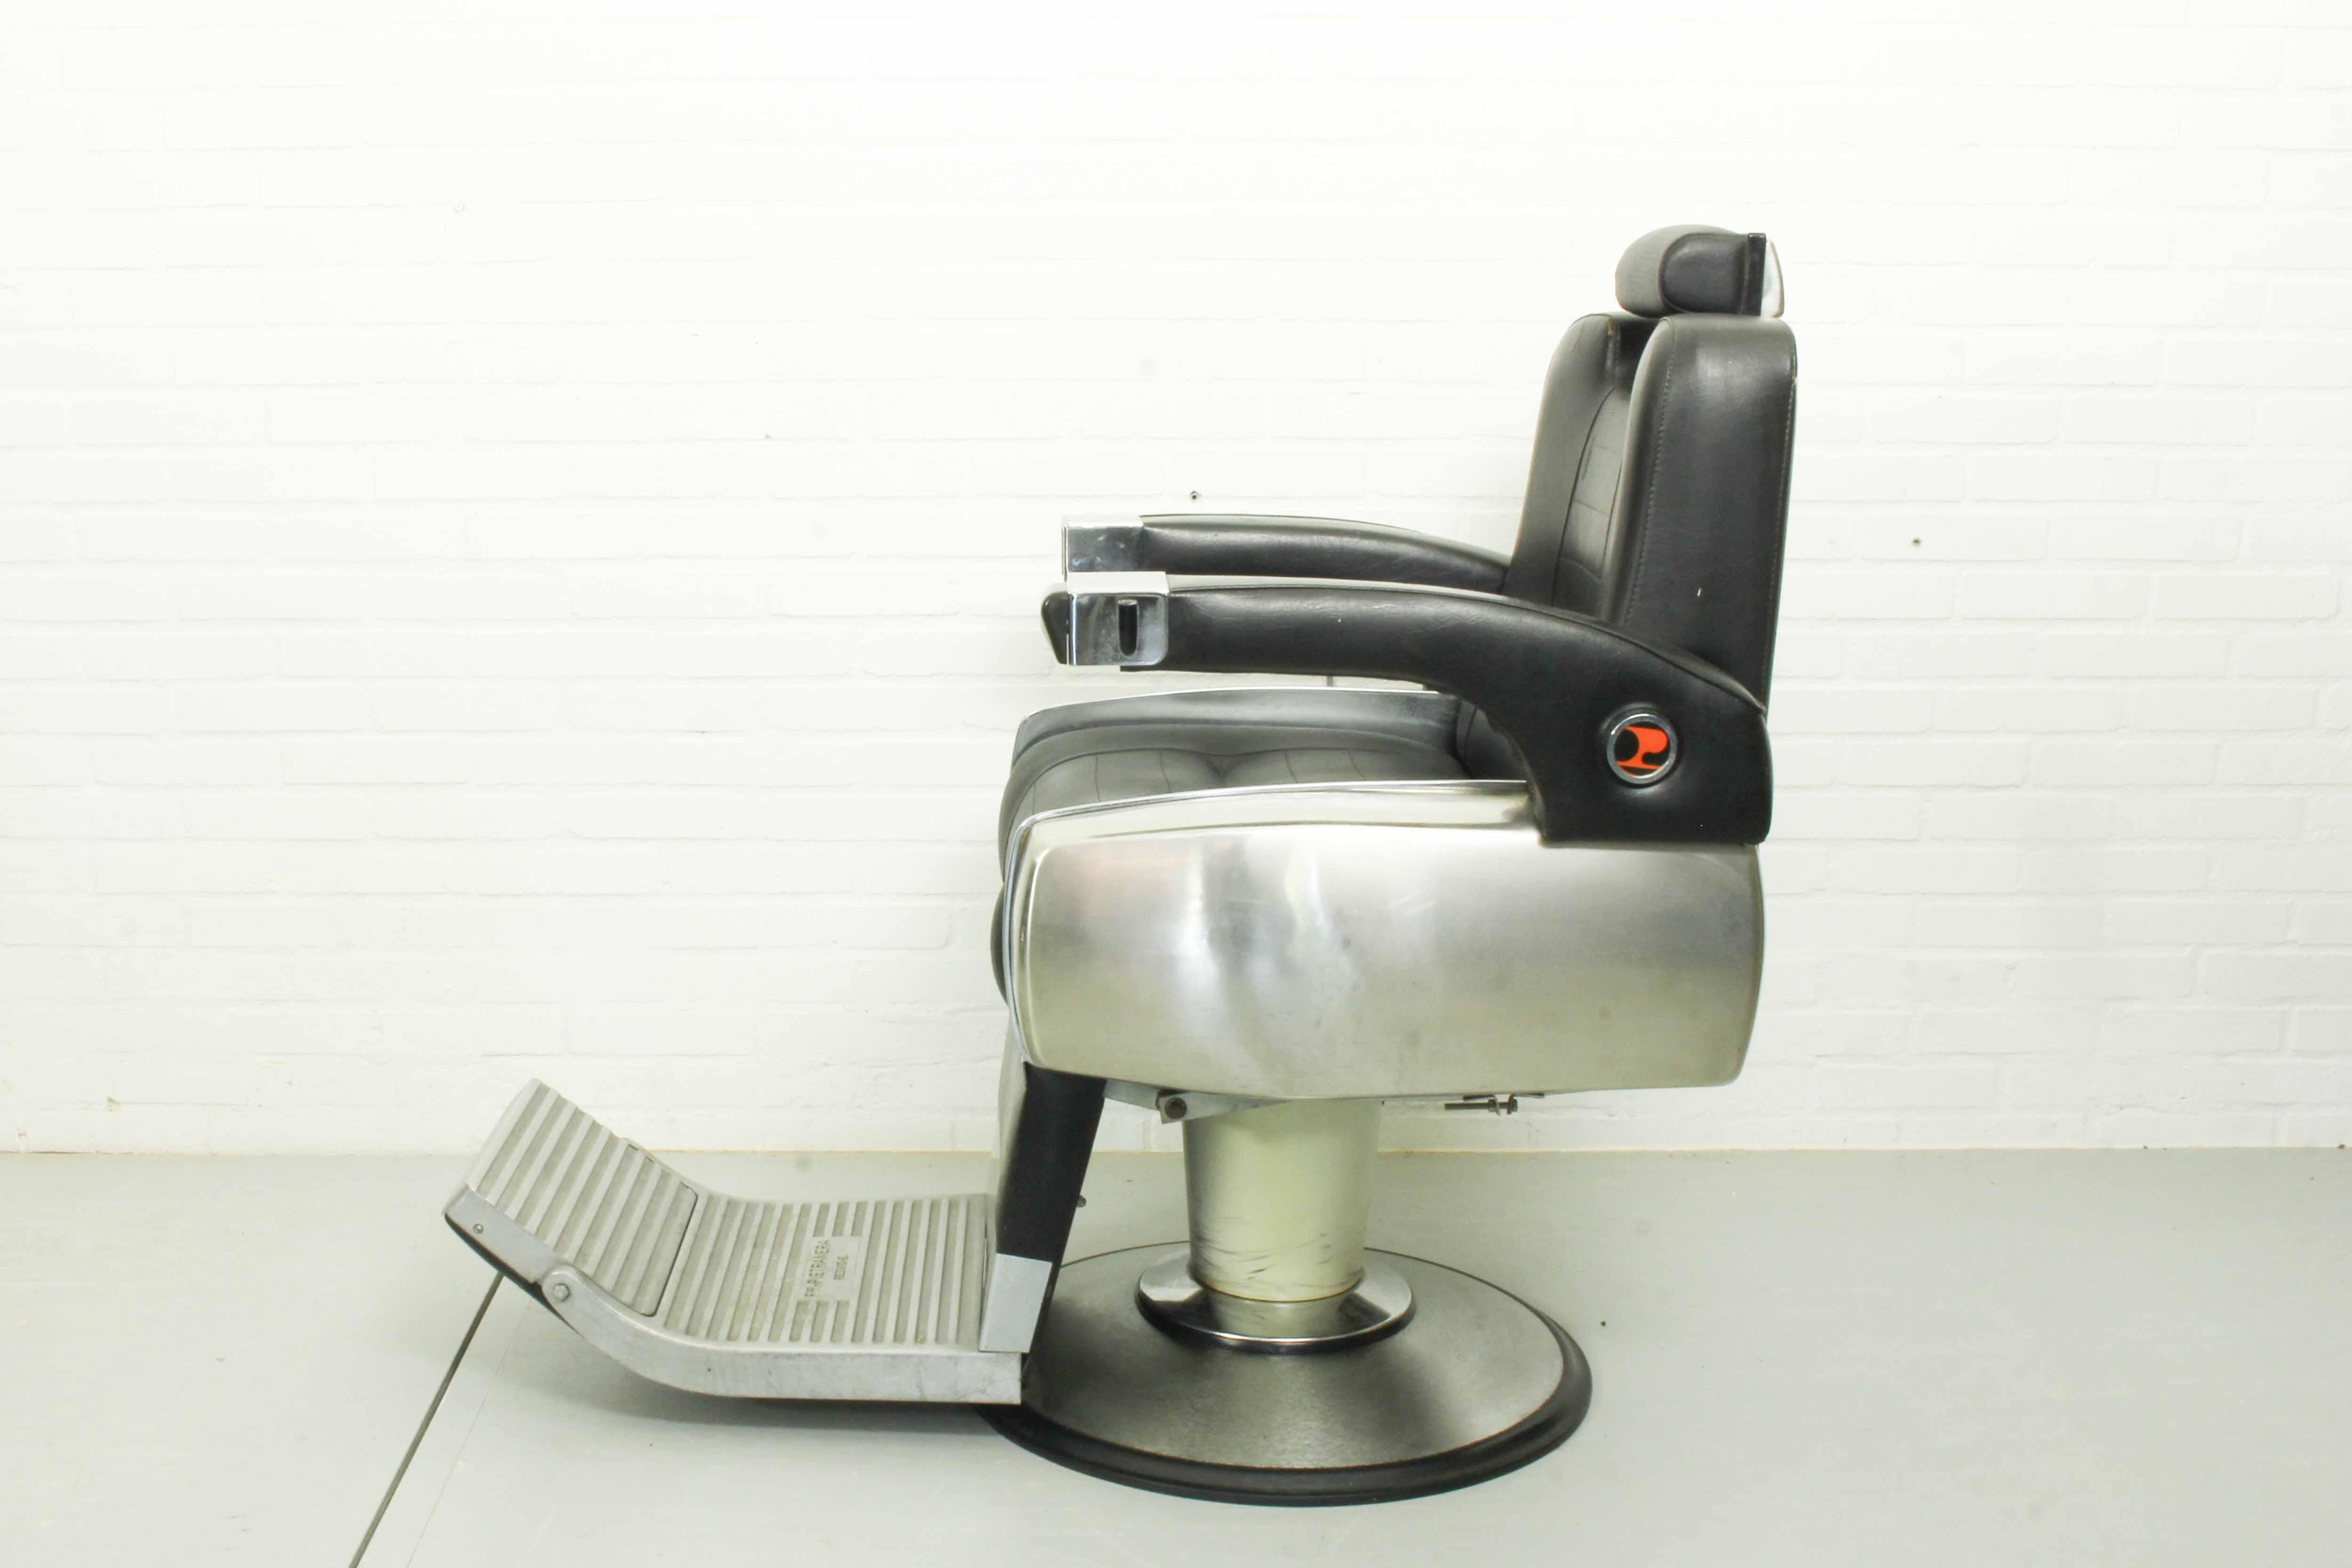 3 Barber chairs from the 60s, Pietranera brand, in good condition, height adjustment and backrest with reclining platform. In working condition, skai is in vintage conditions with tear and wear in accordance with age and use. Counter with tray for